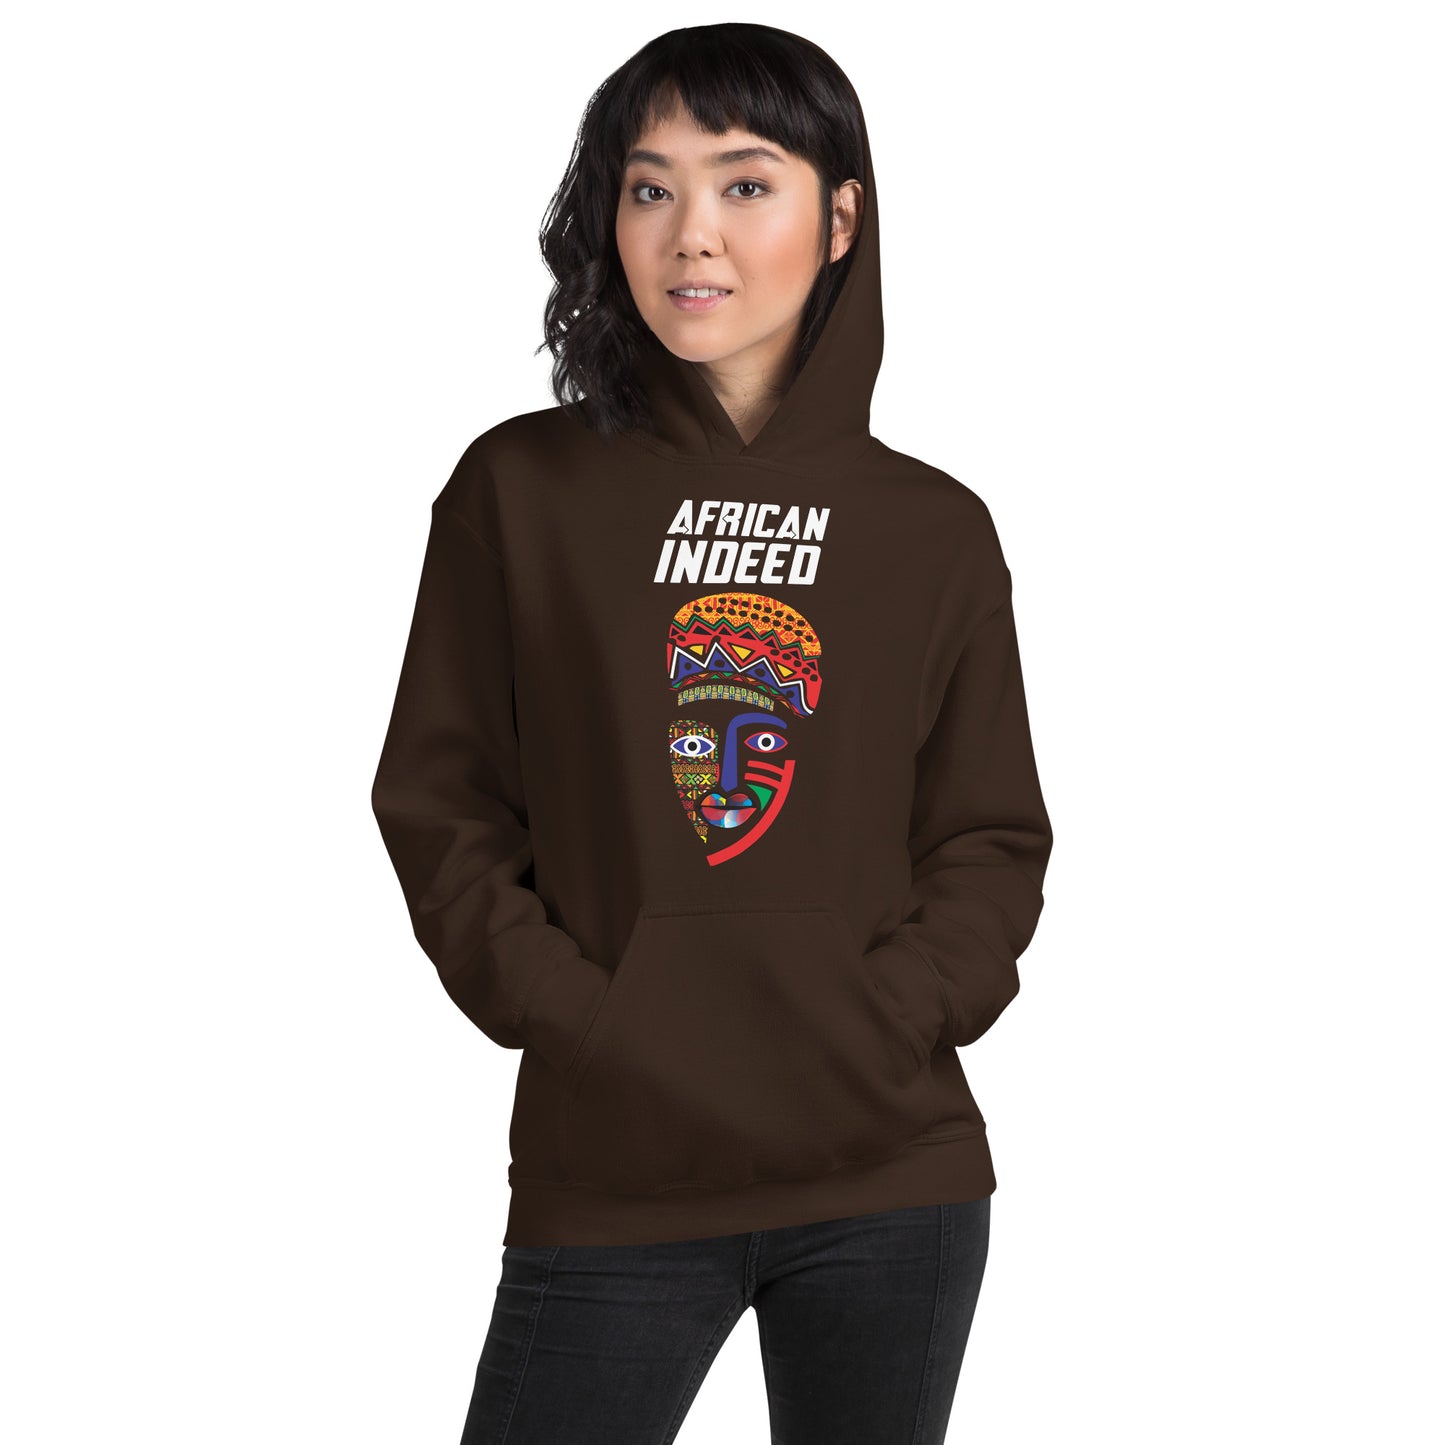 African Indeed Pullover Hoodie